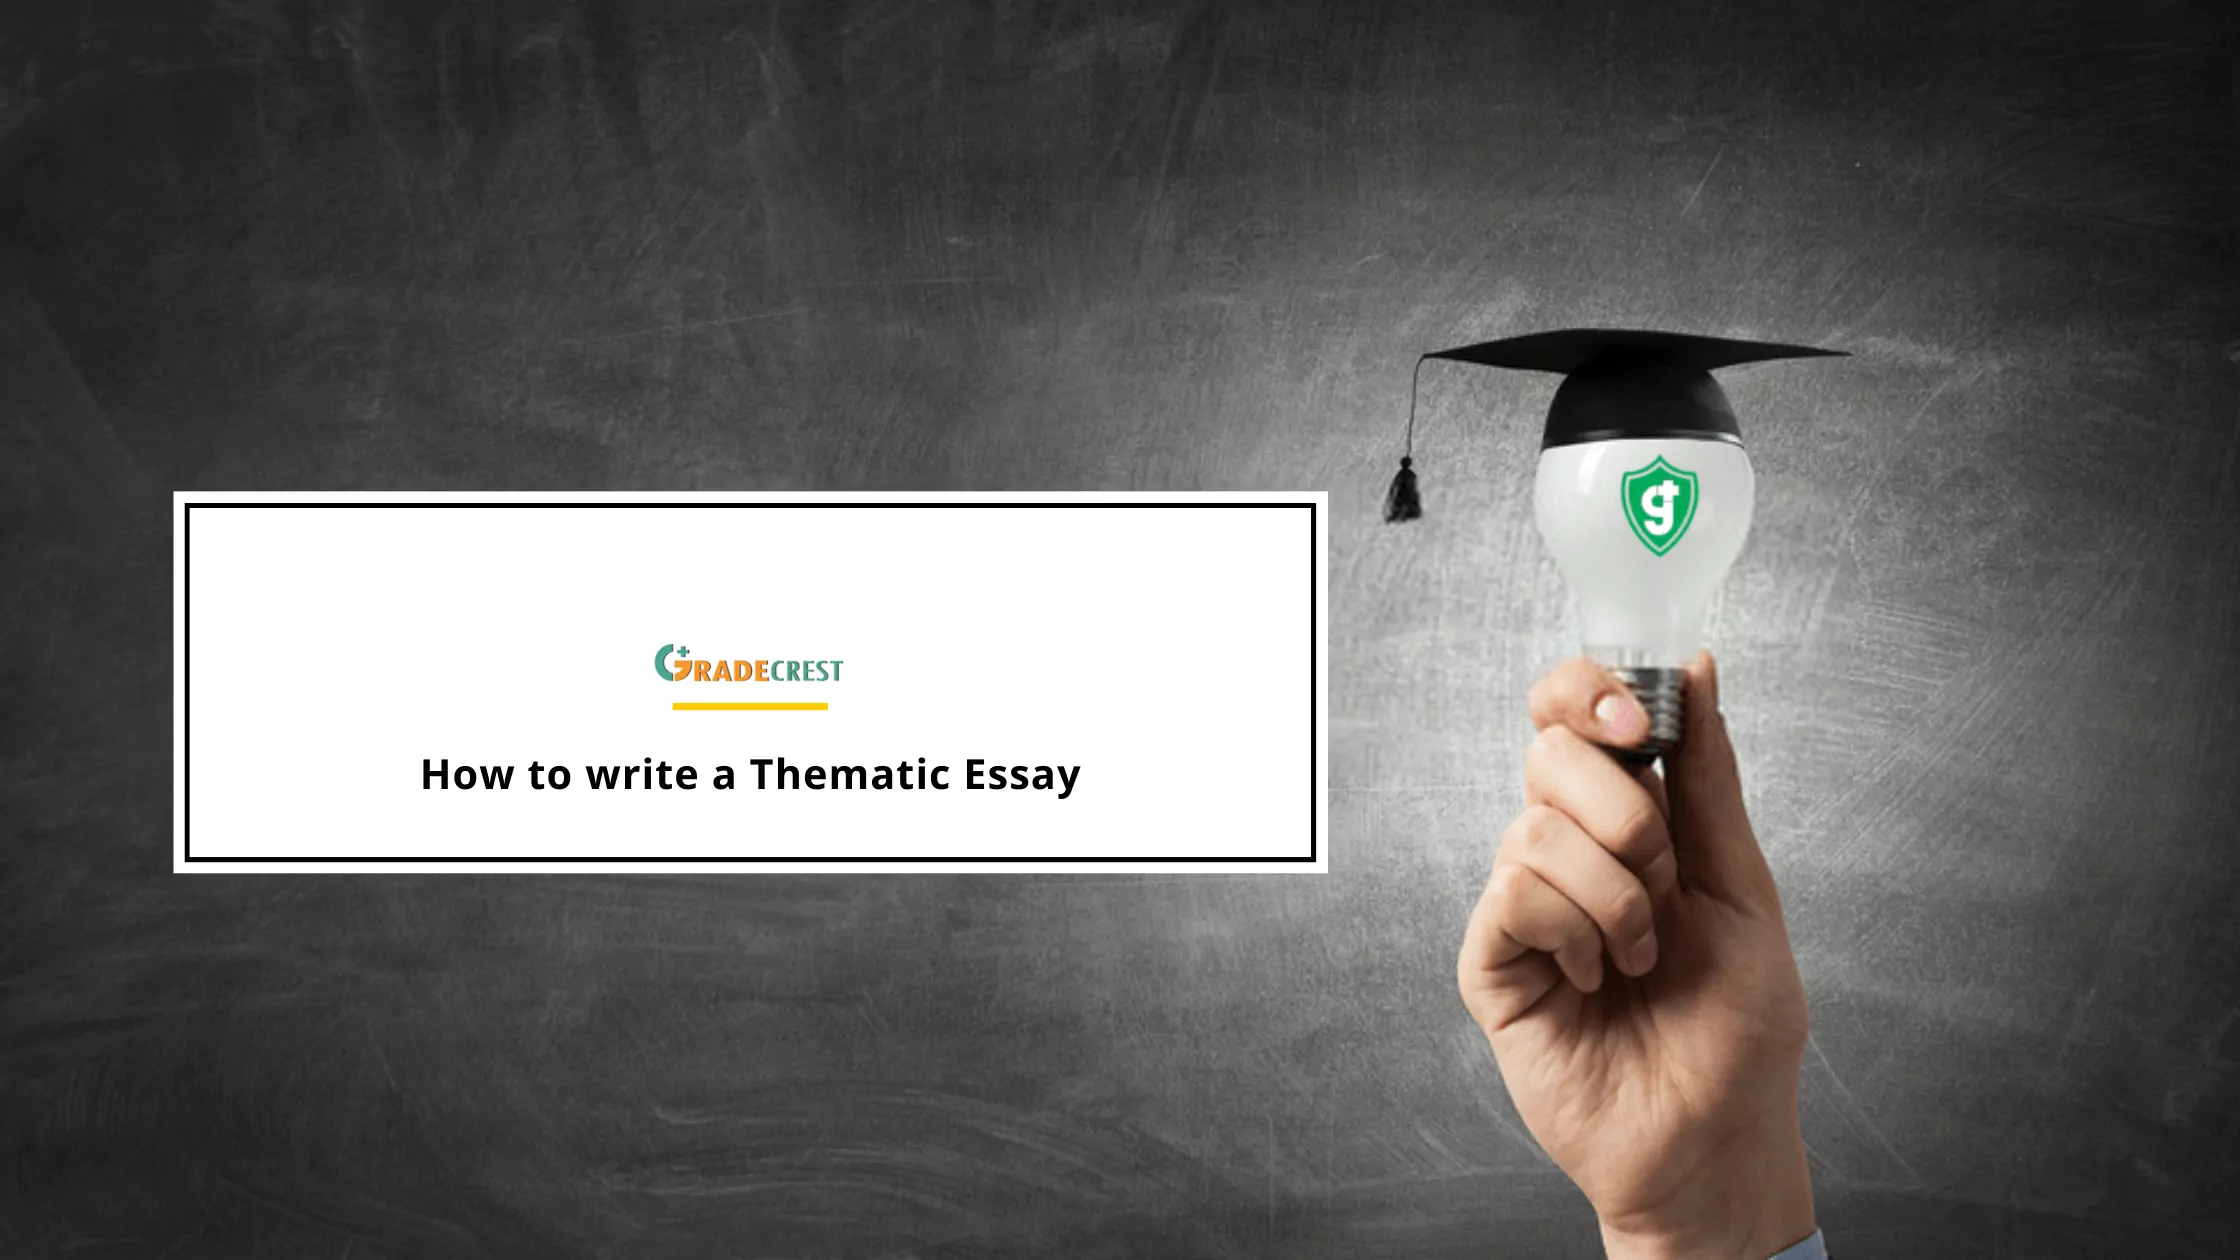 Thematic essay students' Guide